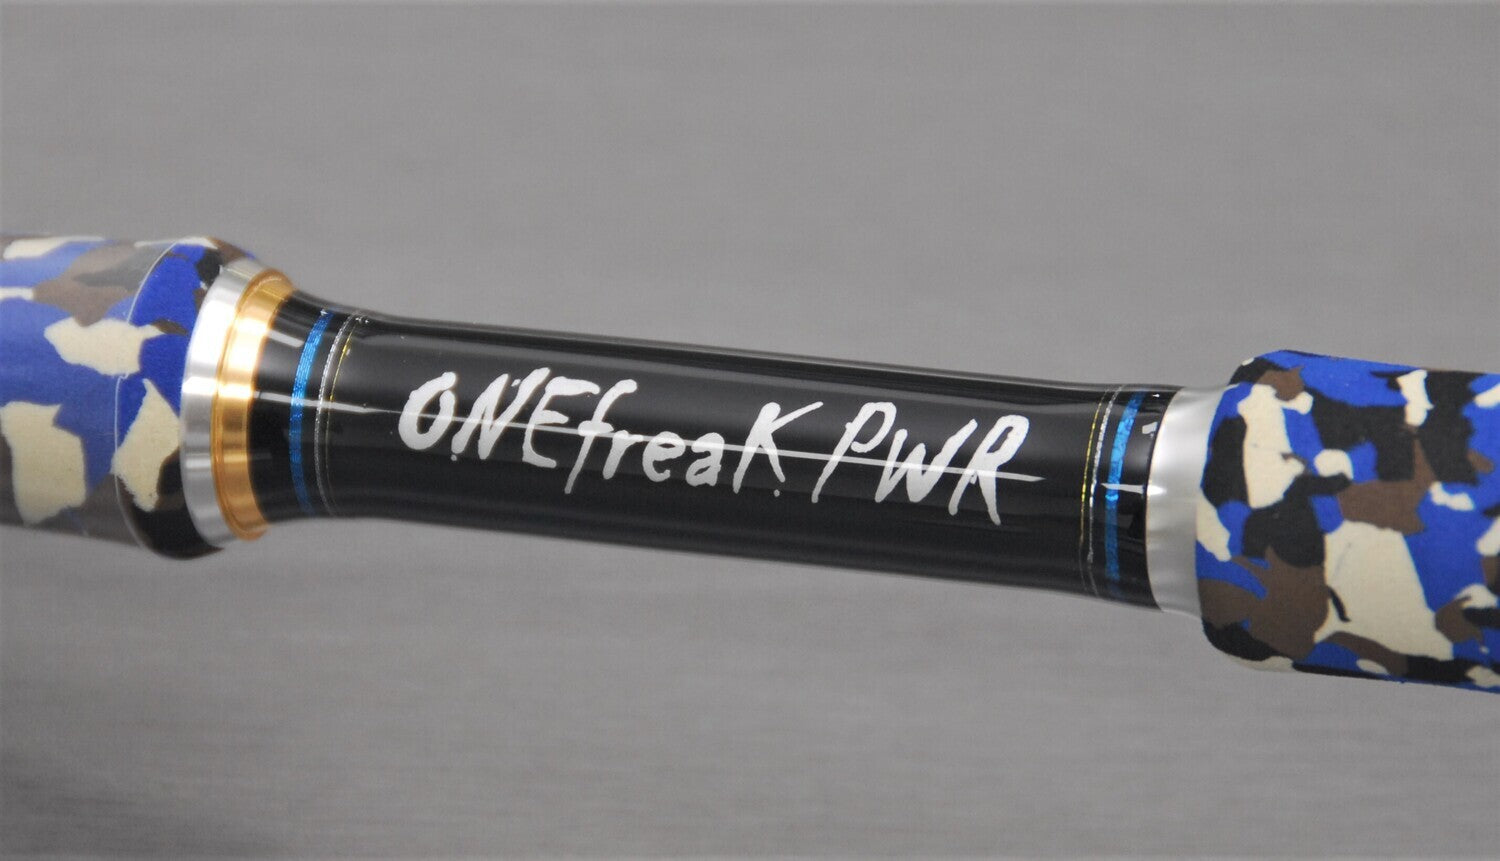 Miller Rods OneFreak PWR Baitcast  Fishing Rod -  - Mansfield Hunting & Fishing - Products to prepare for Corona Virus